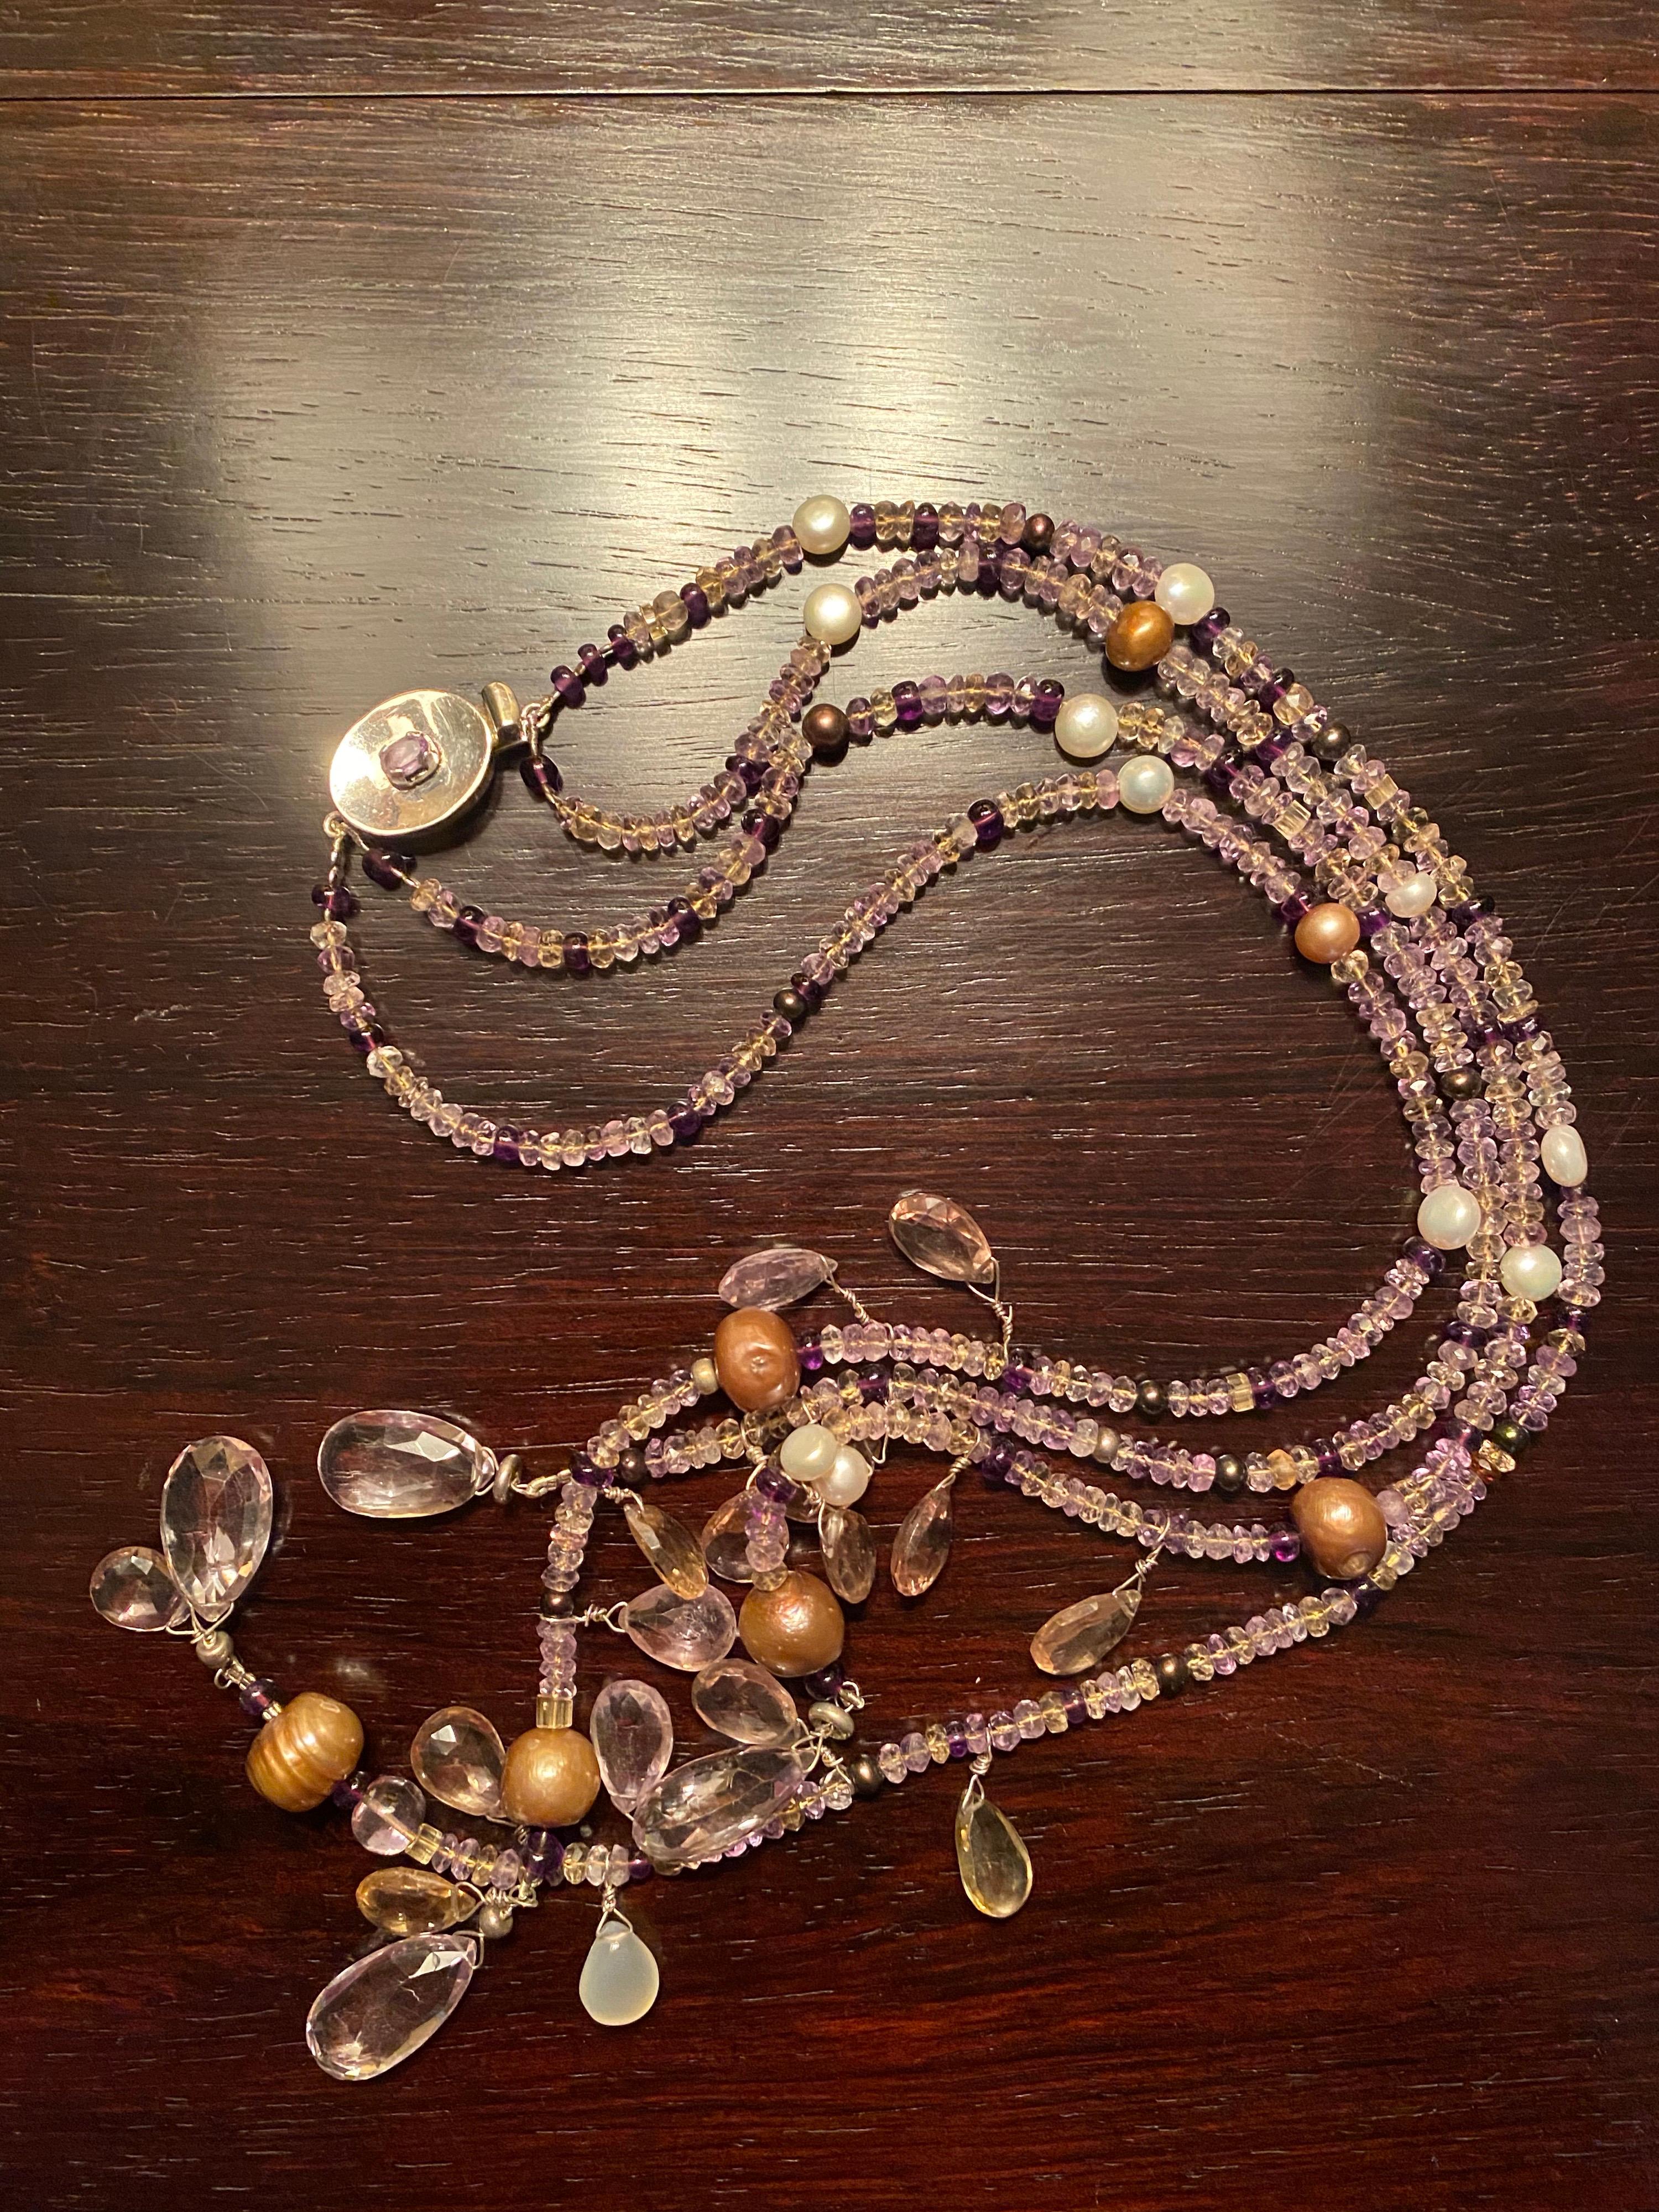 Briolette Cut Ametrine Gemstone and Freshwater Pearl Lariat Necklace with a Silver Clasp For Sale